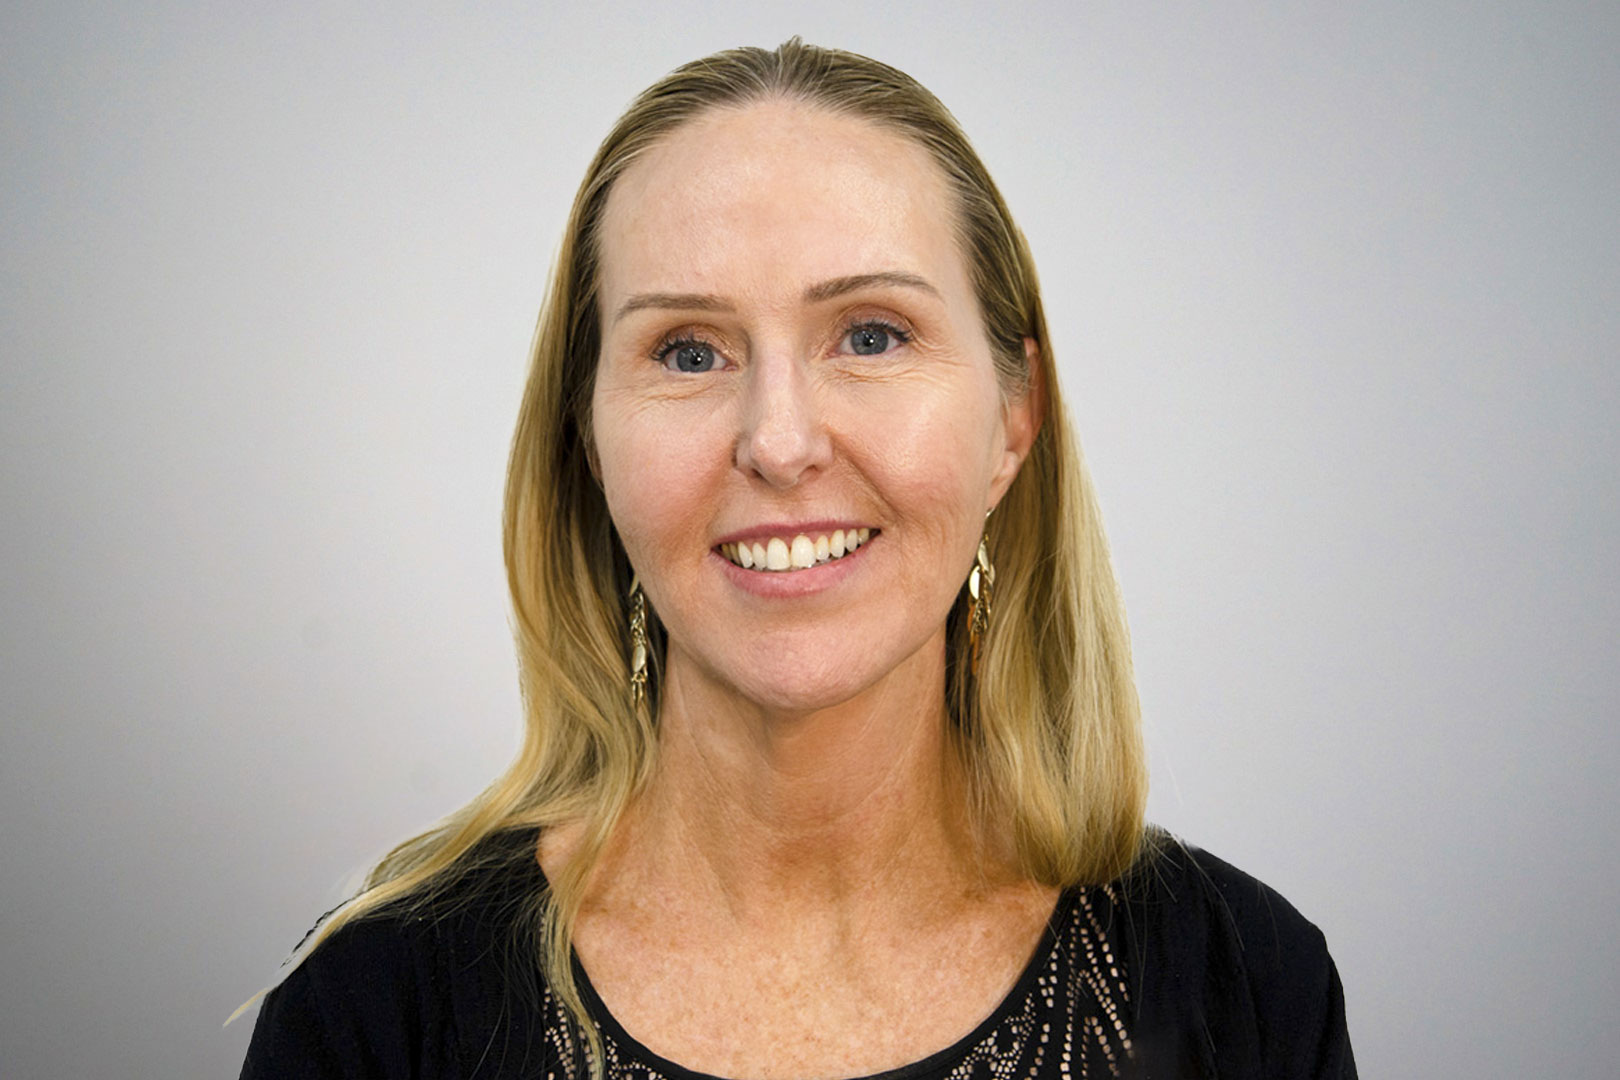 A photo of board member Victoria smiling at the camera on a grey background